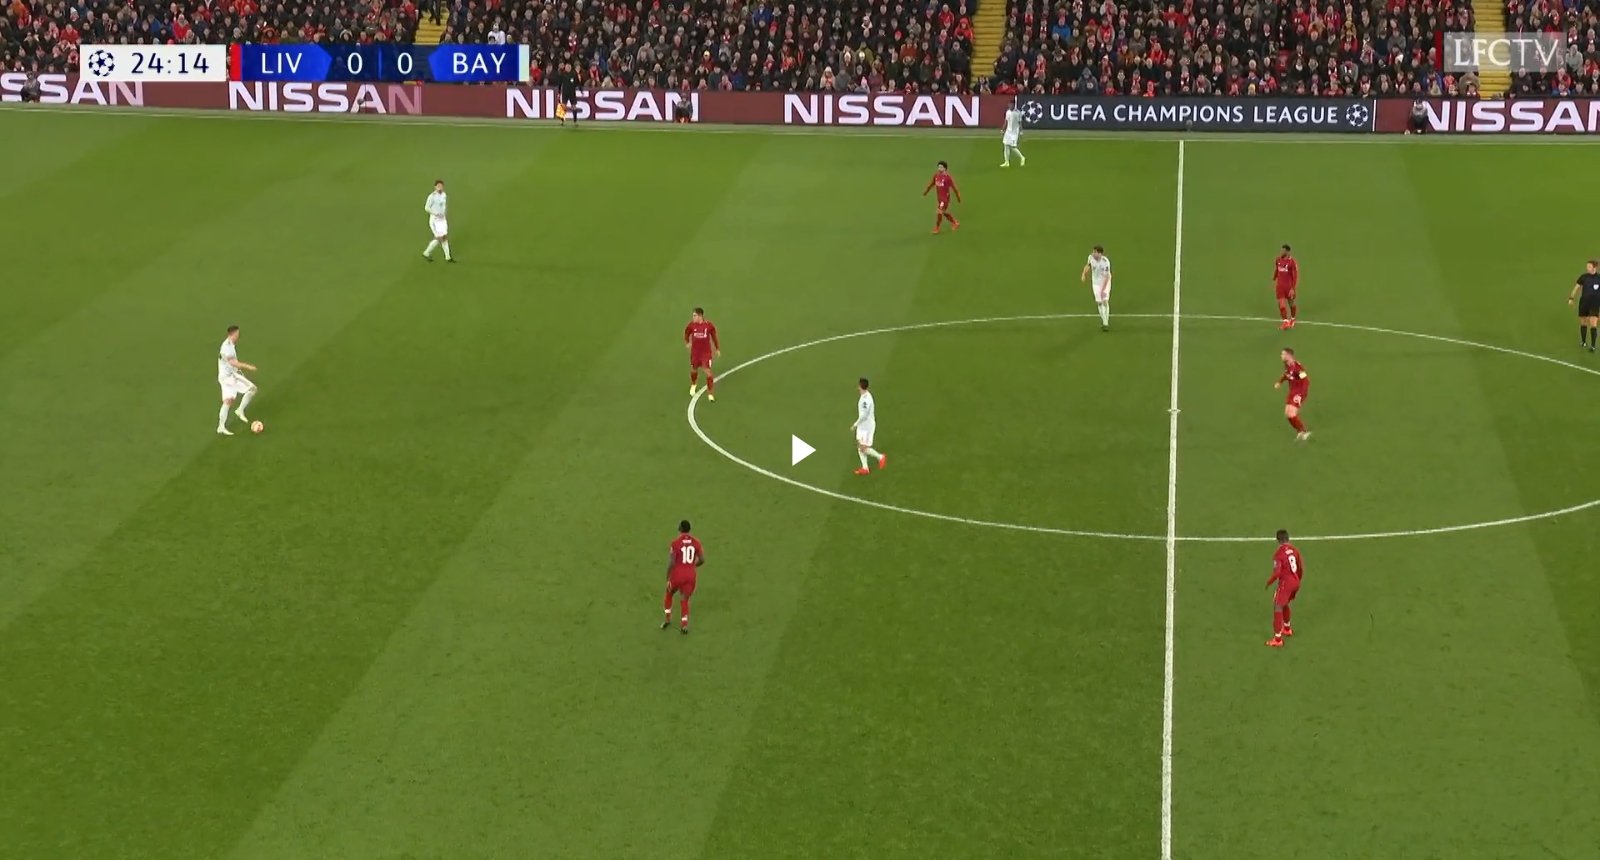 Liverpool's front and midfield 3 in their most basic positions in 4-3-3, a formation Jurgen Klopp has deployed since his first season. (Image Credits: @LFC TV on YouTube via Breaking the Lines)